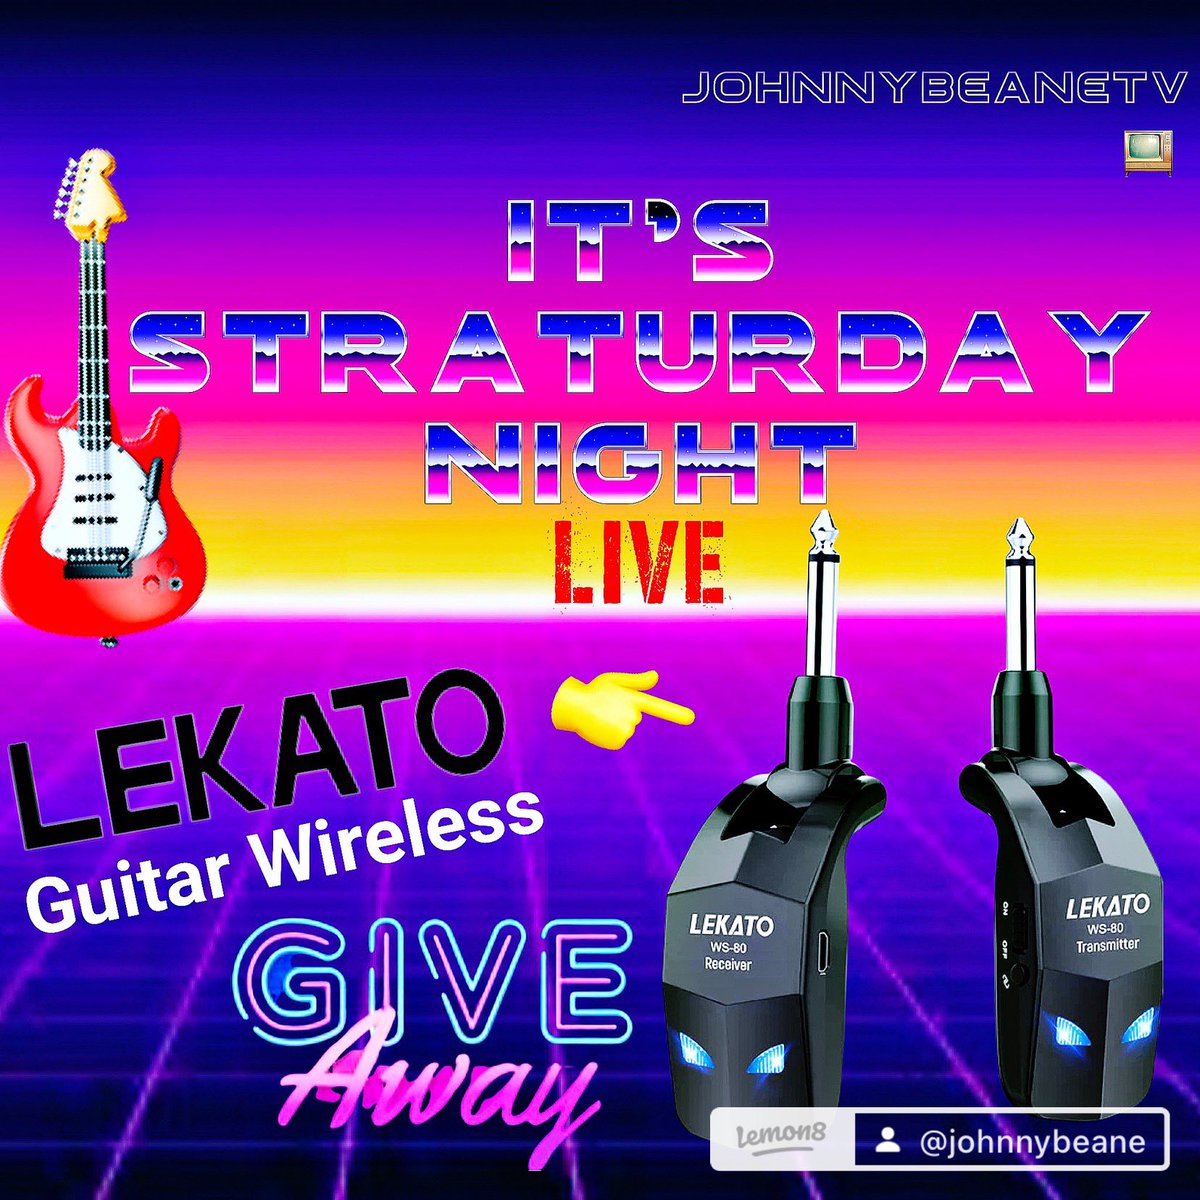 Join us tonight at 10:30 PM Eastern for 'Straturday Night LIVE' where we're giving away a LEKATO Guitar Wireless system! Tune in as we discuss all things music, guitars, and more. #SNL #Straturday #LEKATO #evhgear #KramerGuitars #johnnybeaneTV #EddieVanHalen #vanhalen…